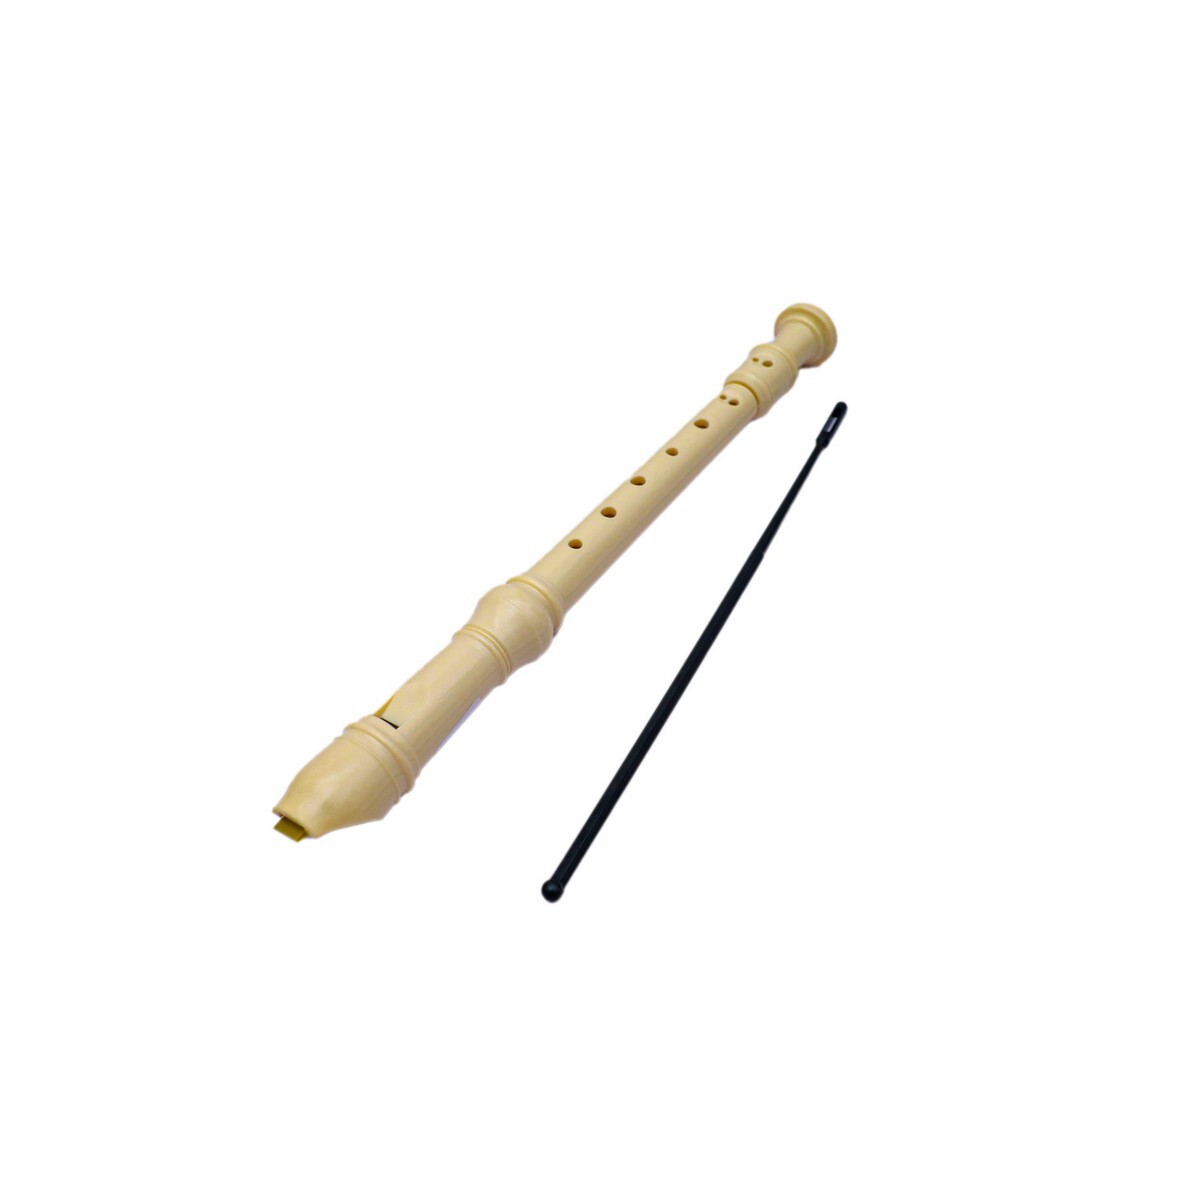 Yiwu Childs Musical Flute-69-3